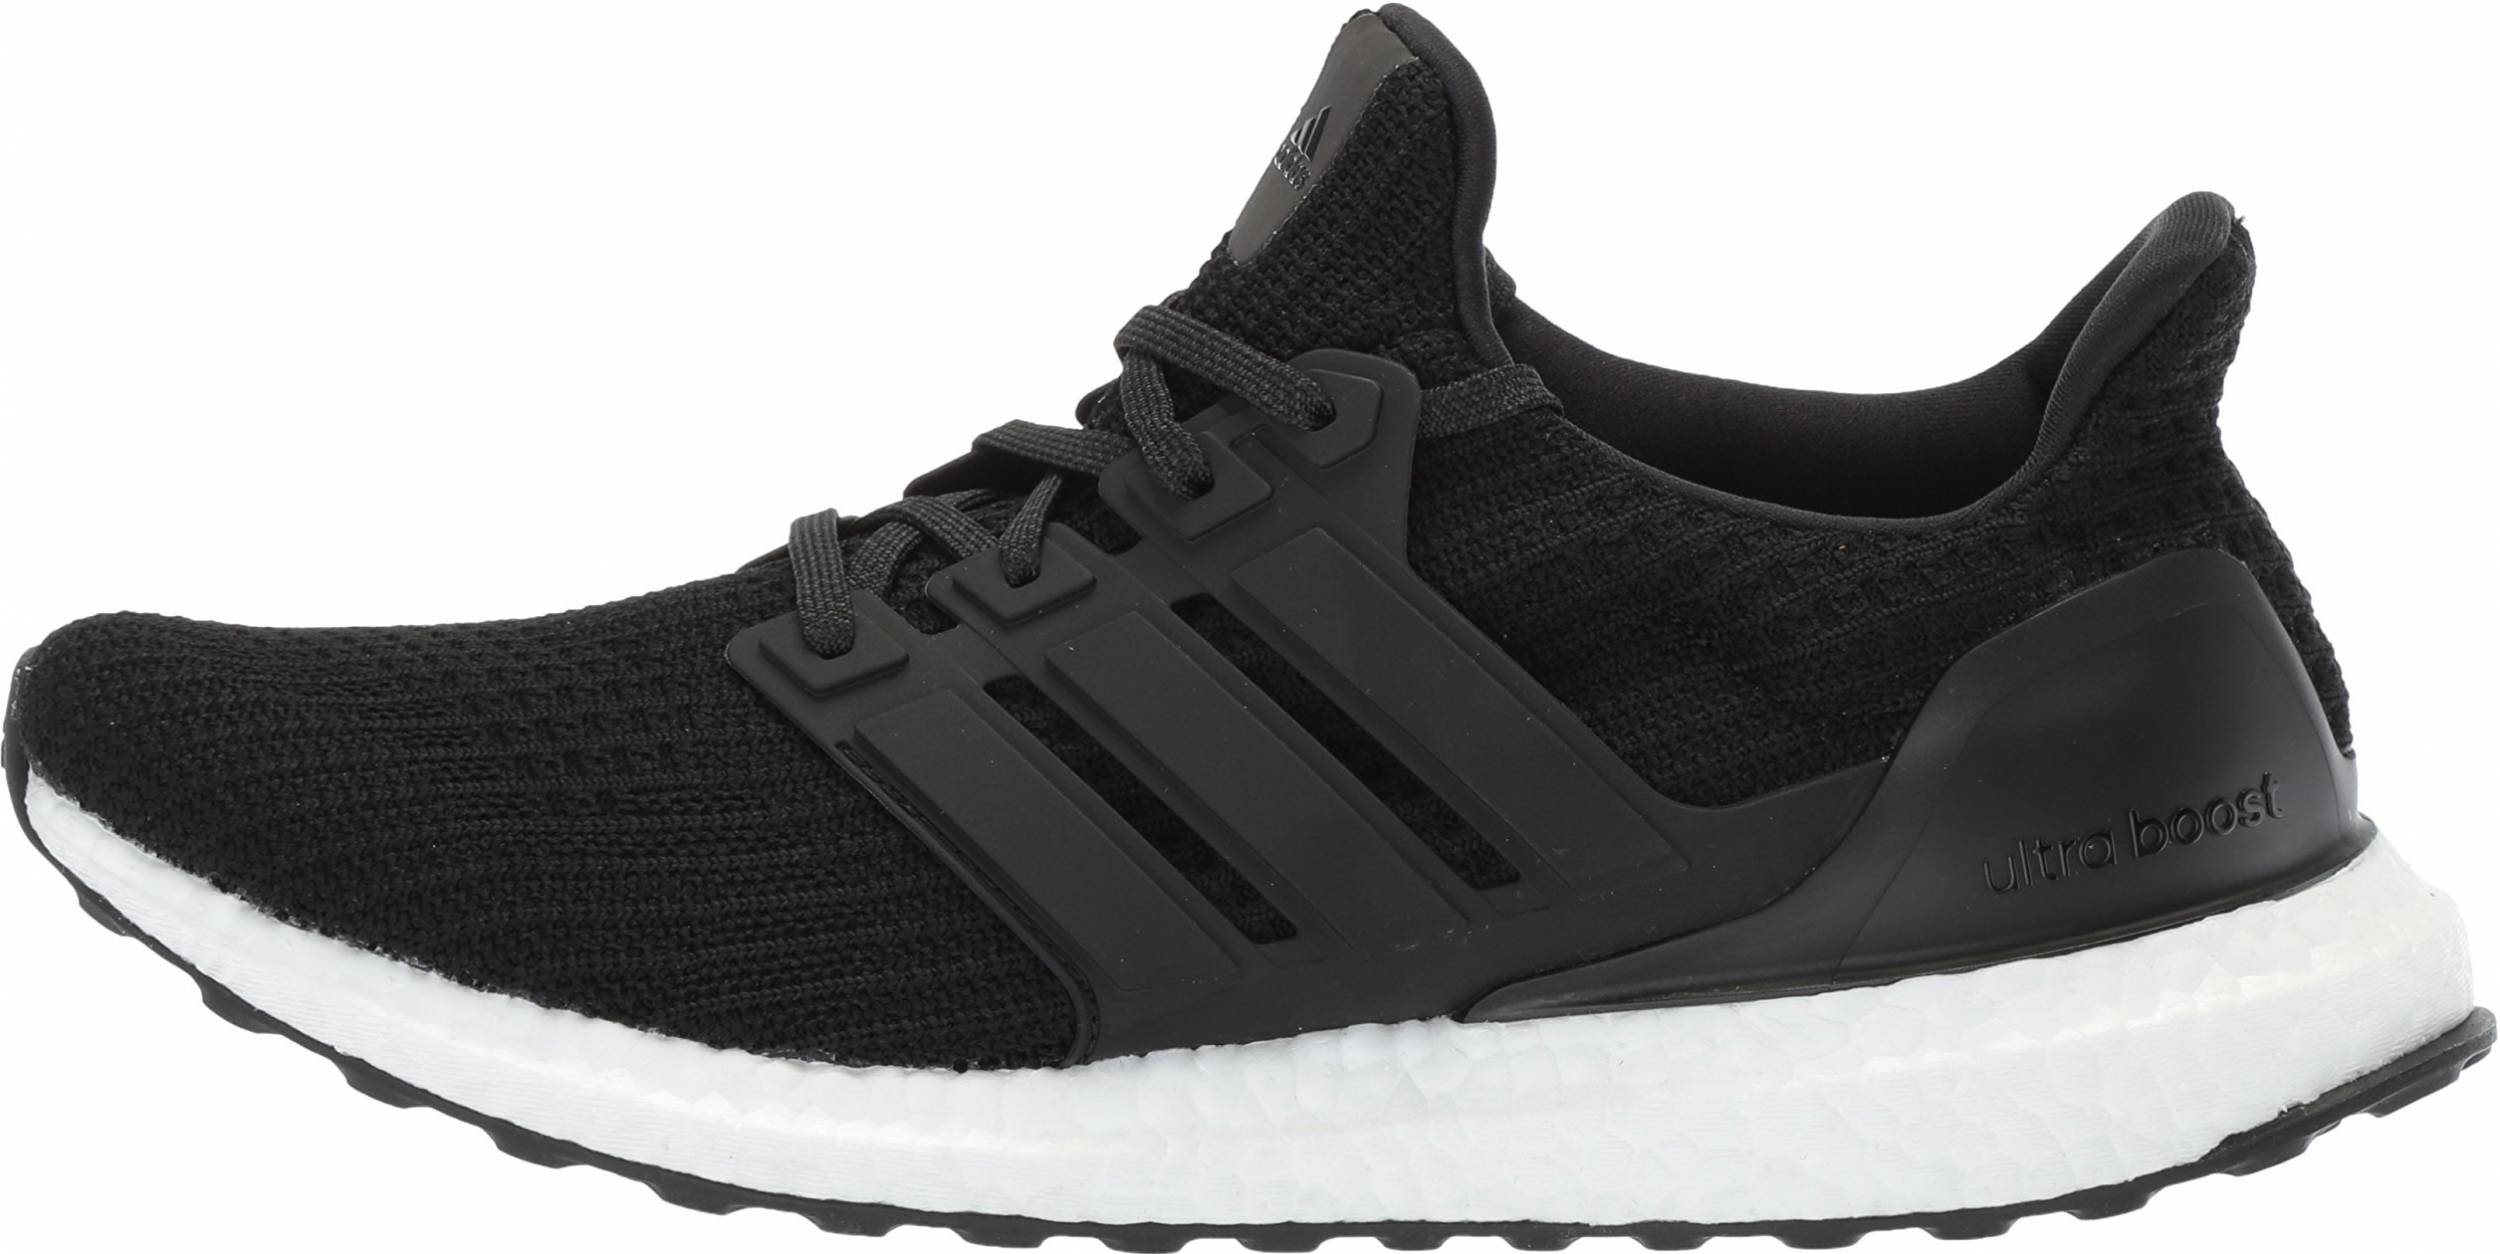 Only $71 + Review of Adidas Ultraboost 